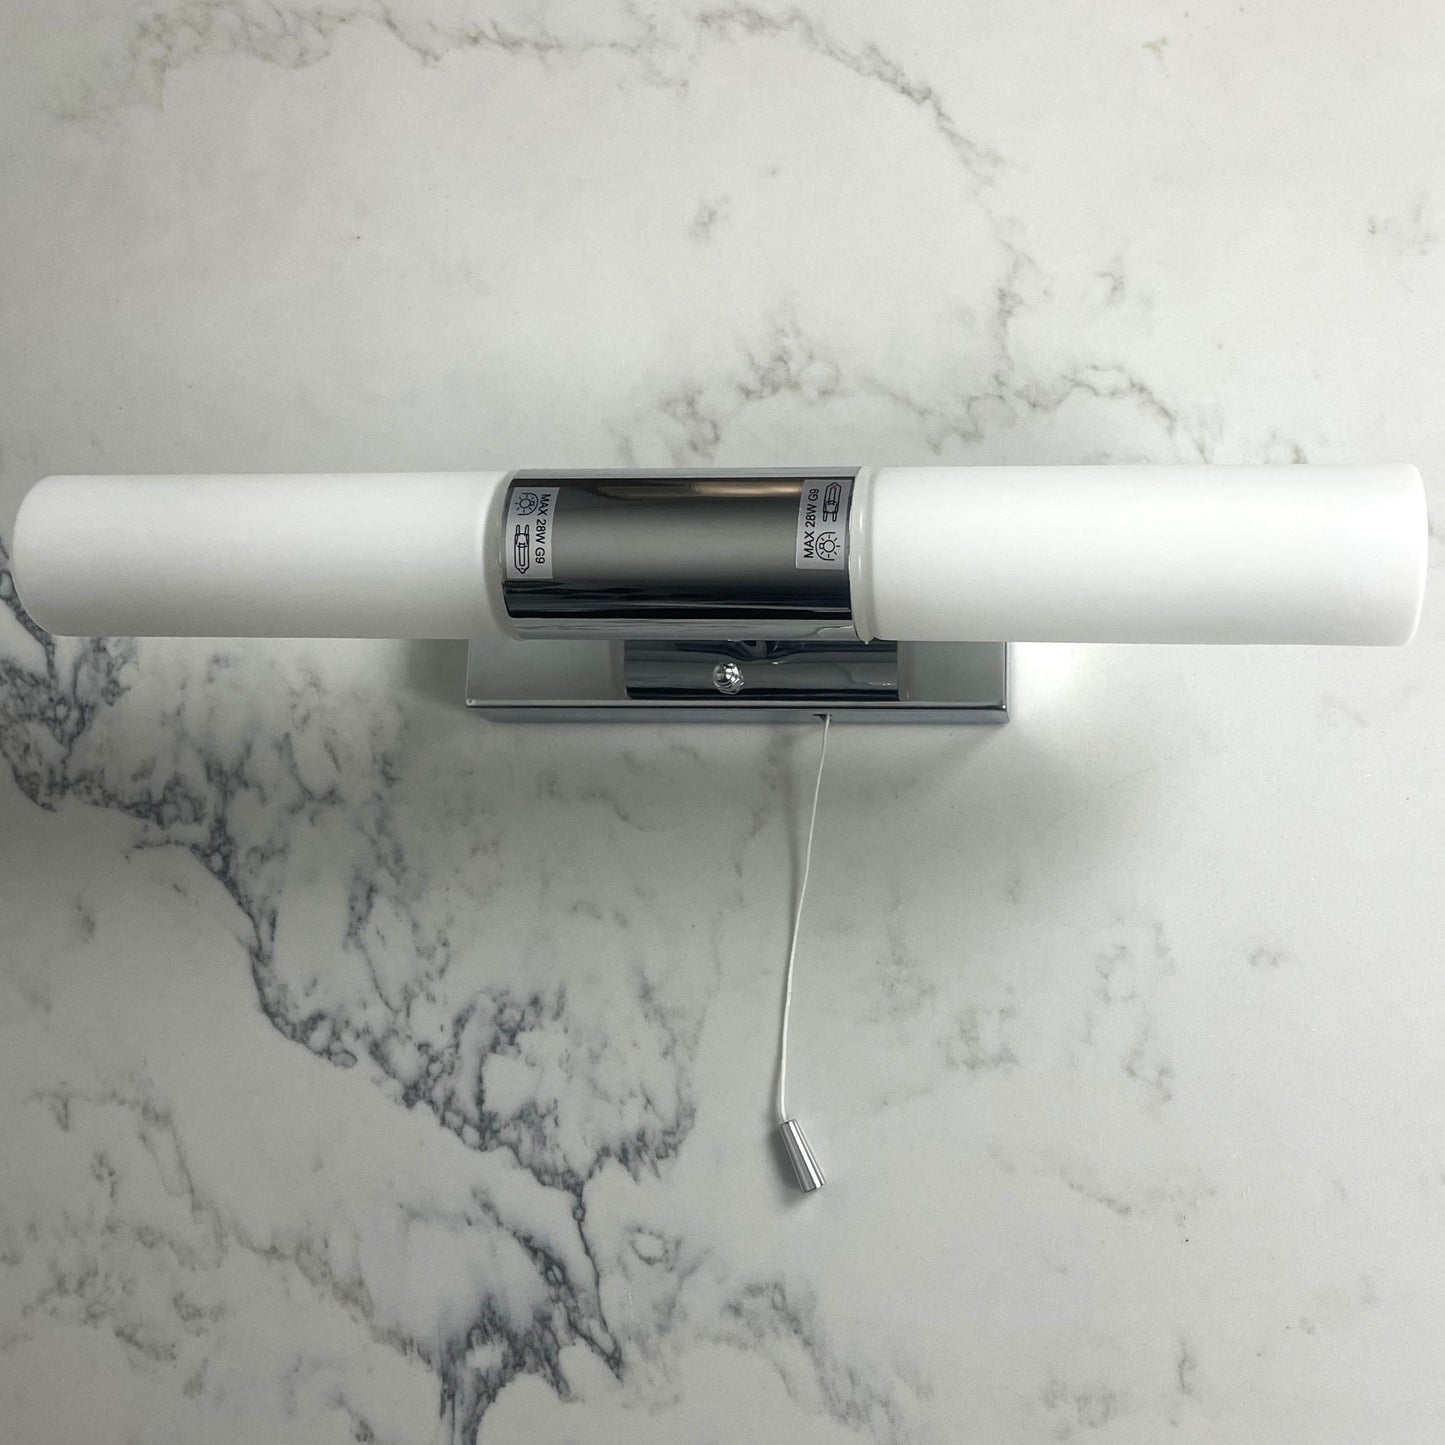 A wall light that is incredibly sleek and modern and would look great in any bathroom. The bathroom will look great with the elegant chrome finish. A soft, gentle light is produced by the two opal white lamps. This wall light has an IP value of IP44 so that you can place it in damp spaces such as the bathroom.